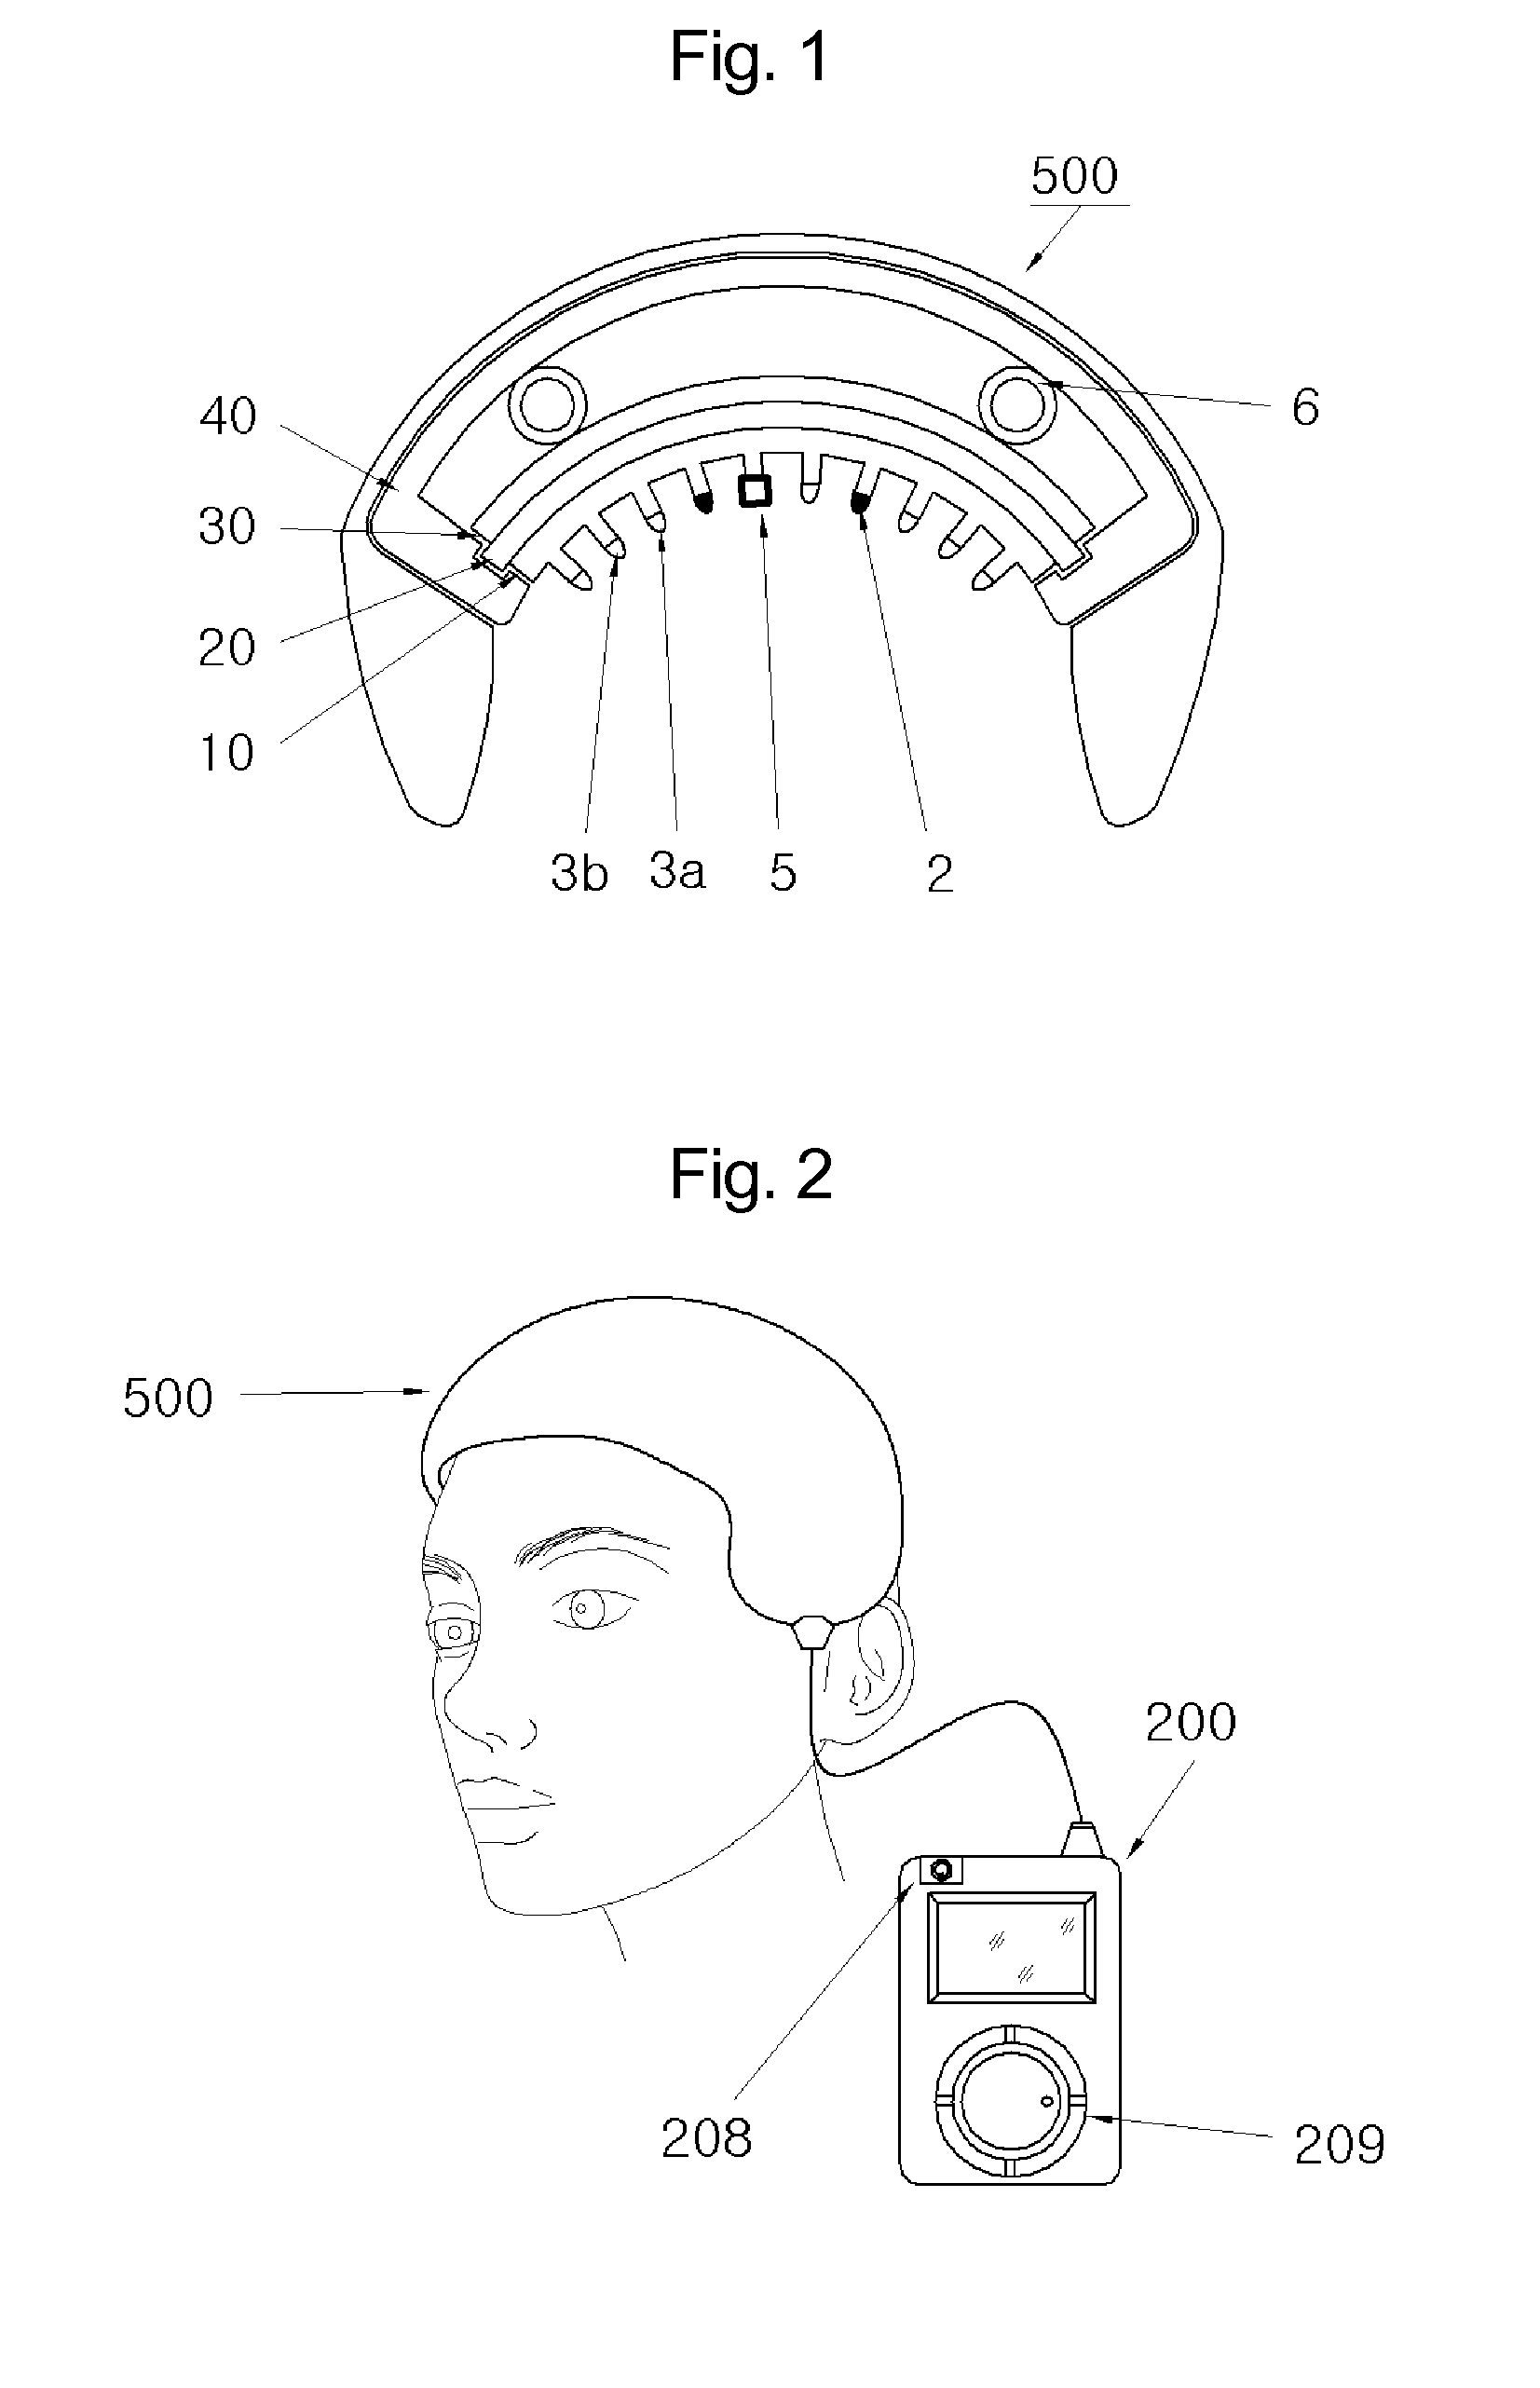 Laser treatment device for hair growth stimulation